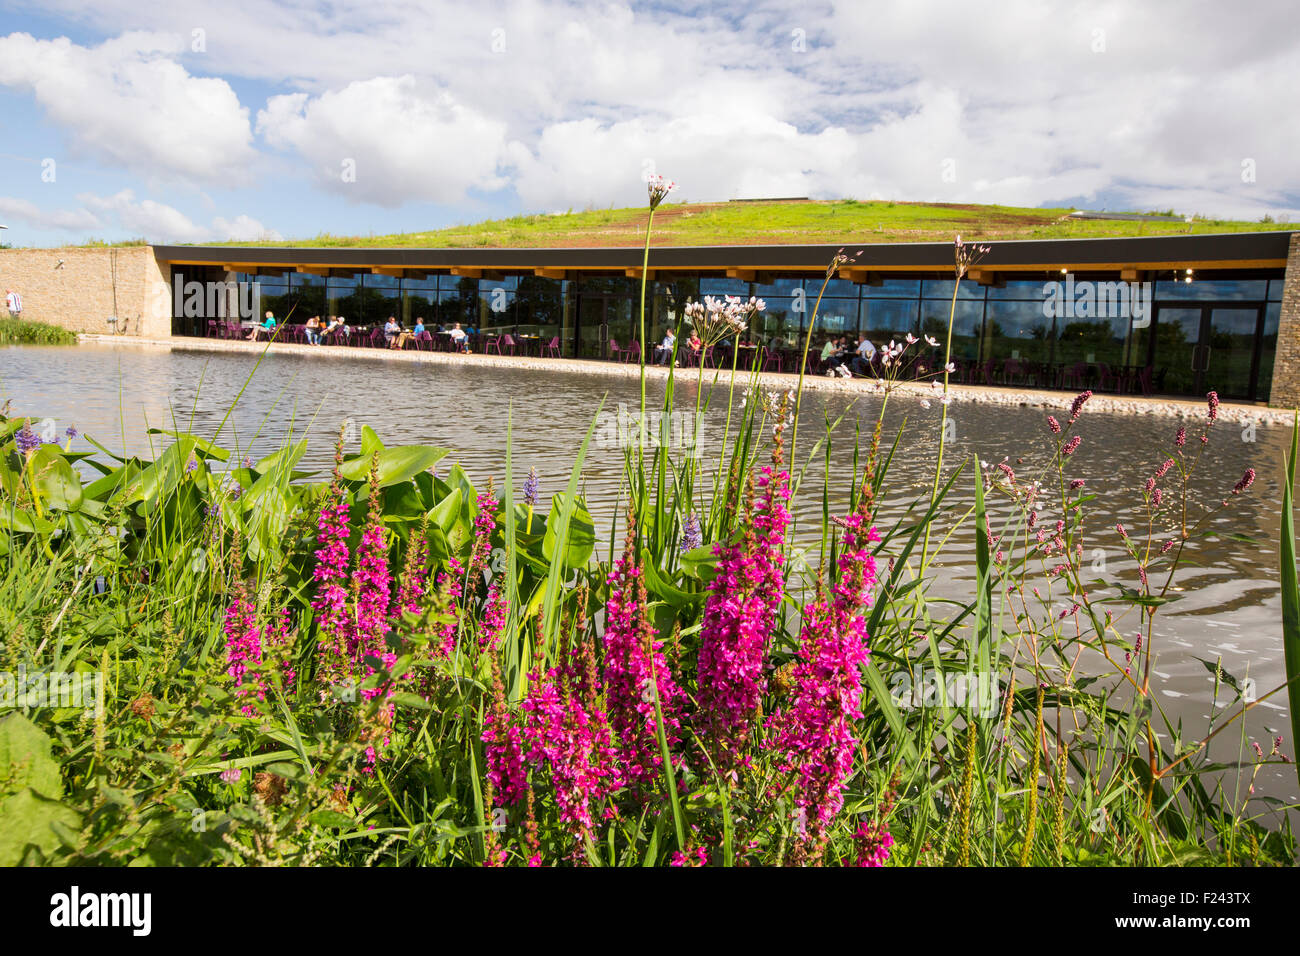 The New Gloucester Service Station on the M5 motorway, UK, is a green roofed building with eco credentials that serves and sells locally sourced food. Stock Photo